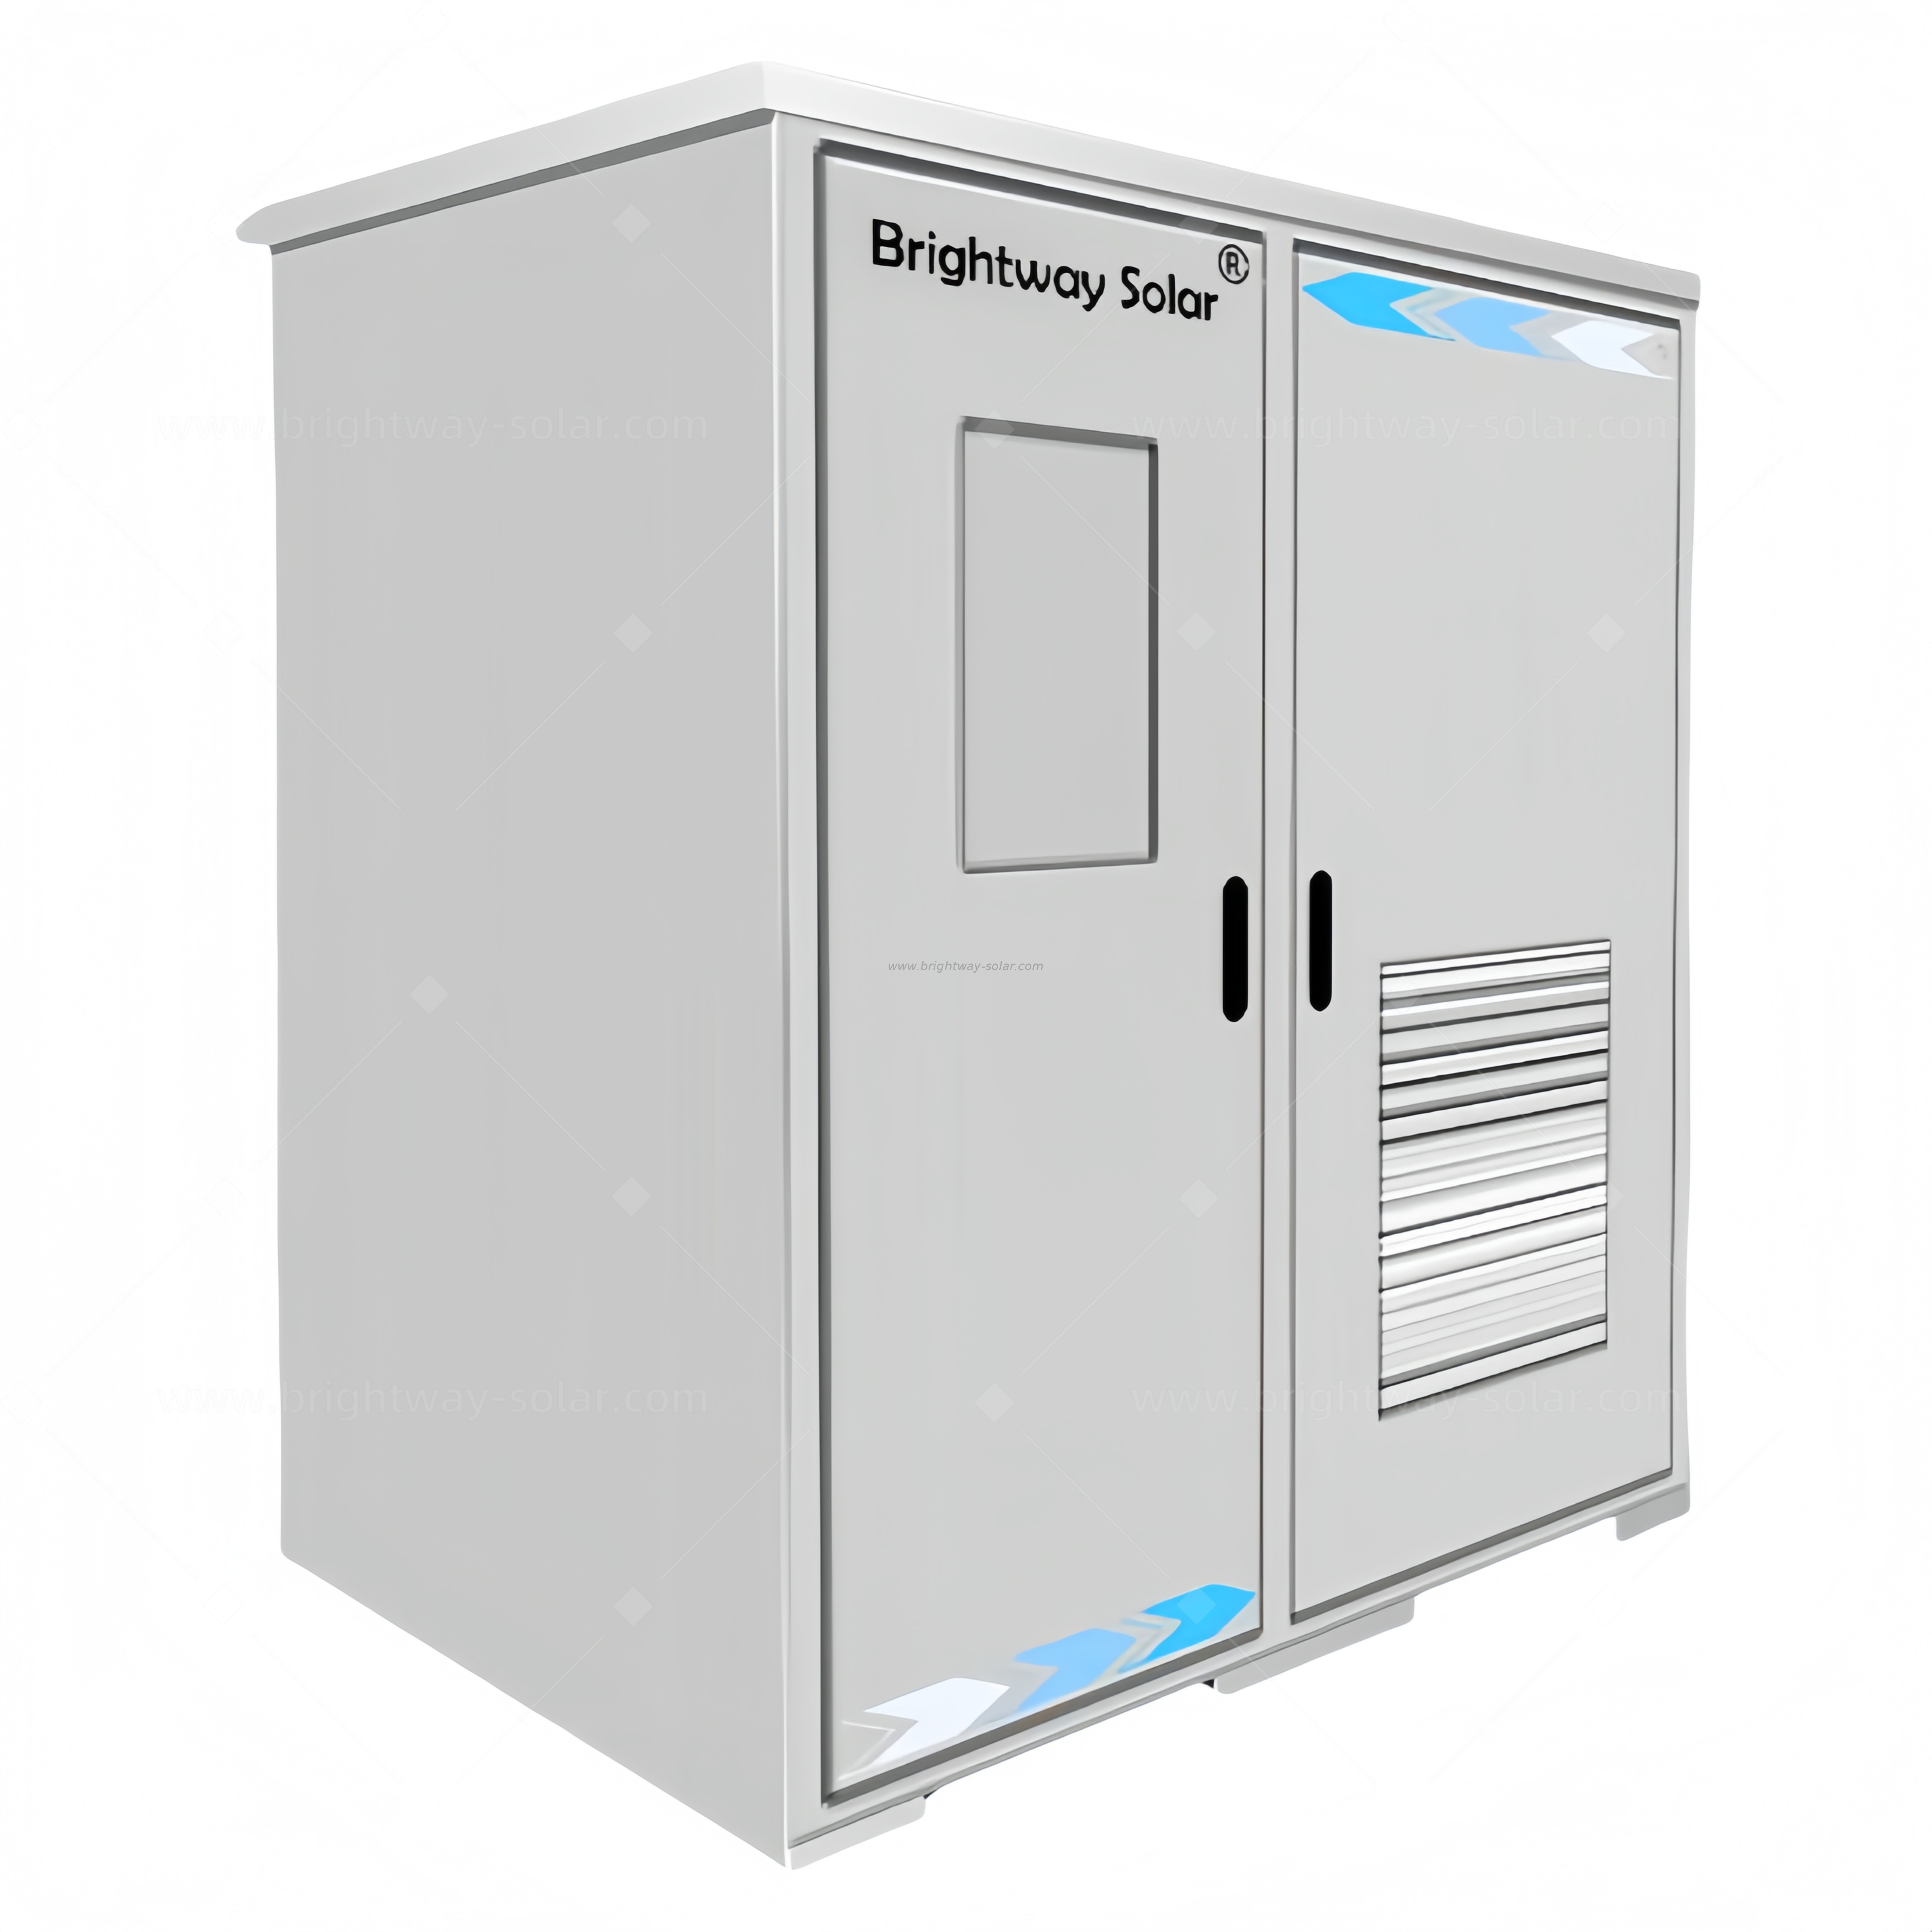 Brightway Solar Lithium Battery Energy Storage Cabinet for 206KWH with Air Conditioning Cooling